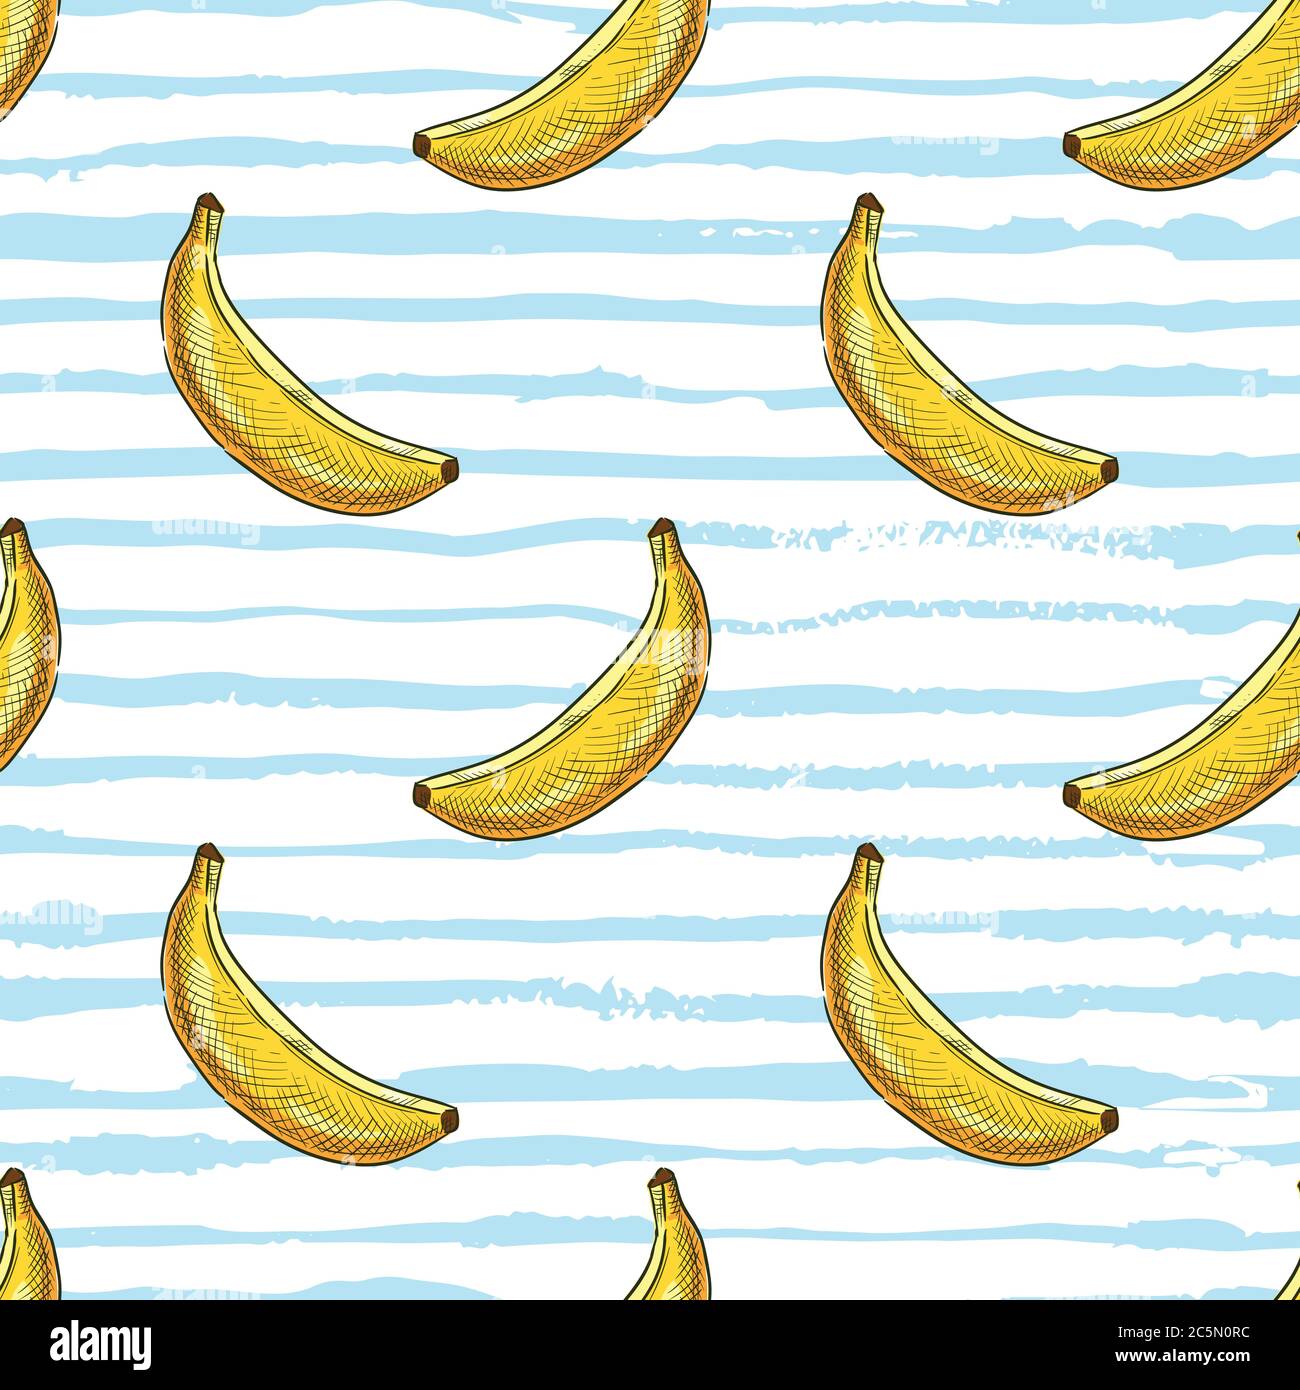 Tropical seamless pattern. Exotic banana fruits on blue white watercolor stripes background. Vector hand drawn sketch illustration. Summer design for Stock Vector